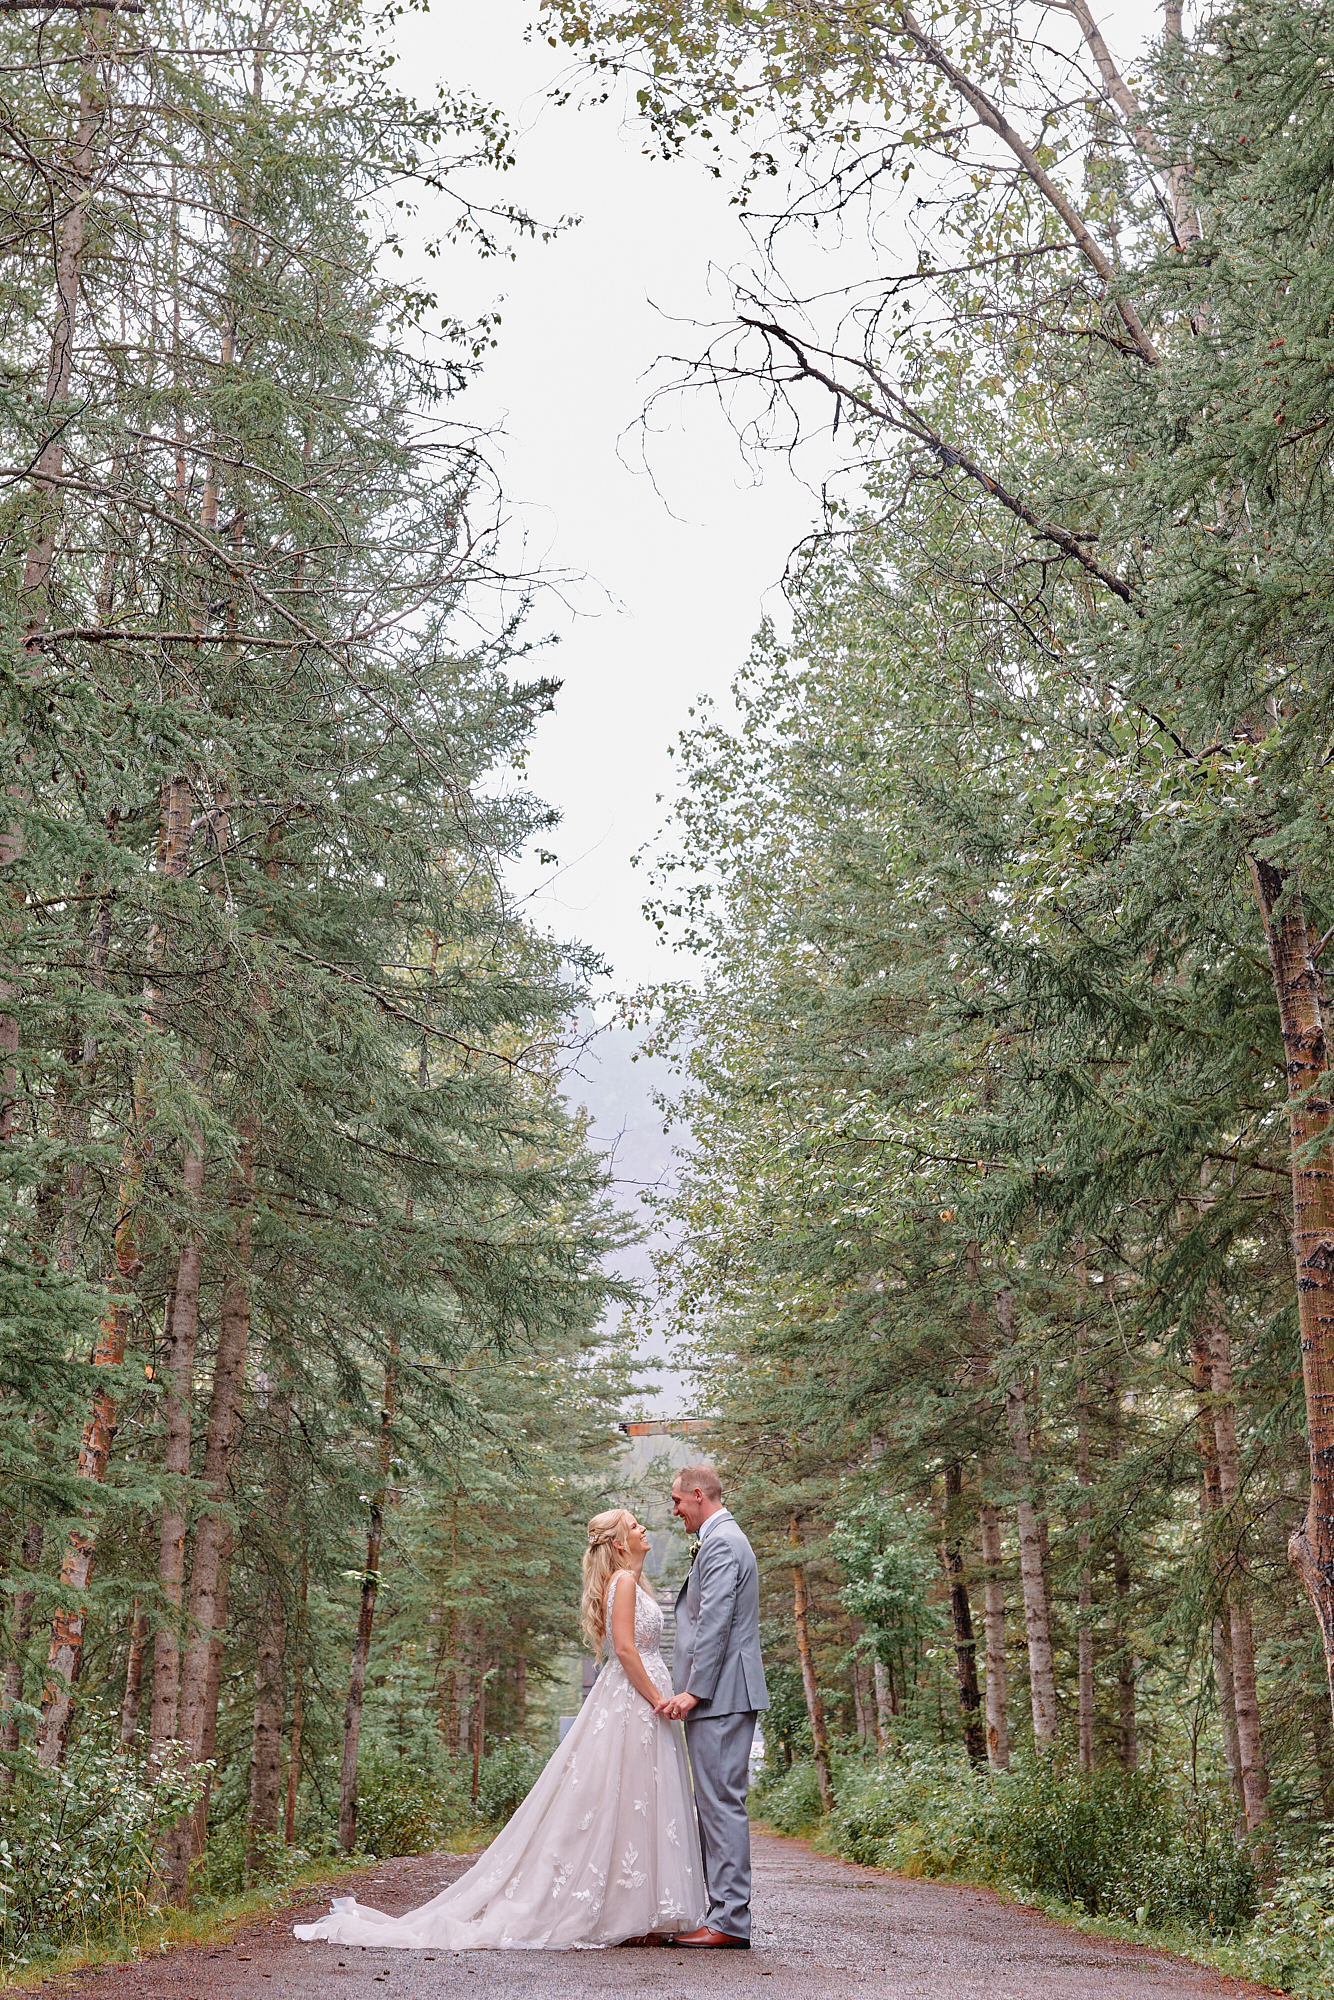 Wedding Portraits at Engine Bridge in Canmore